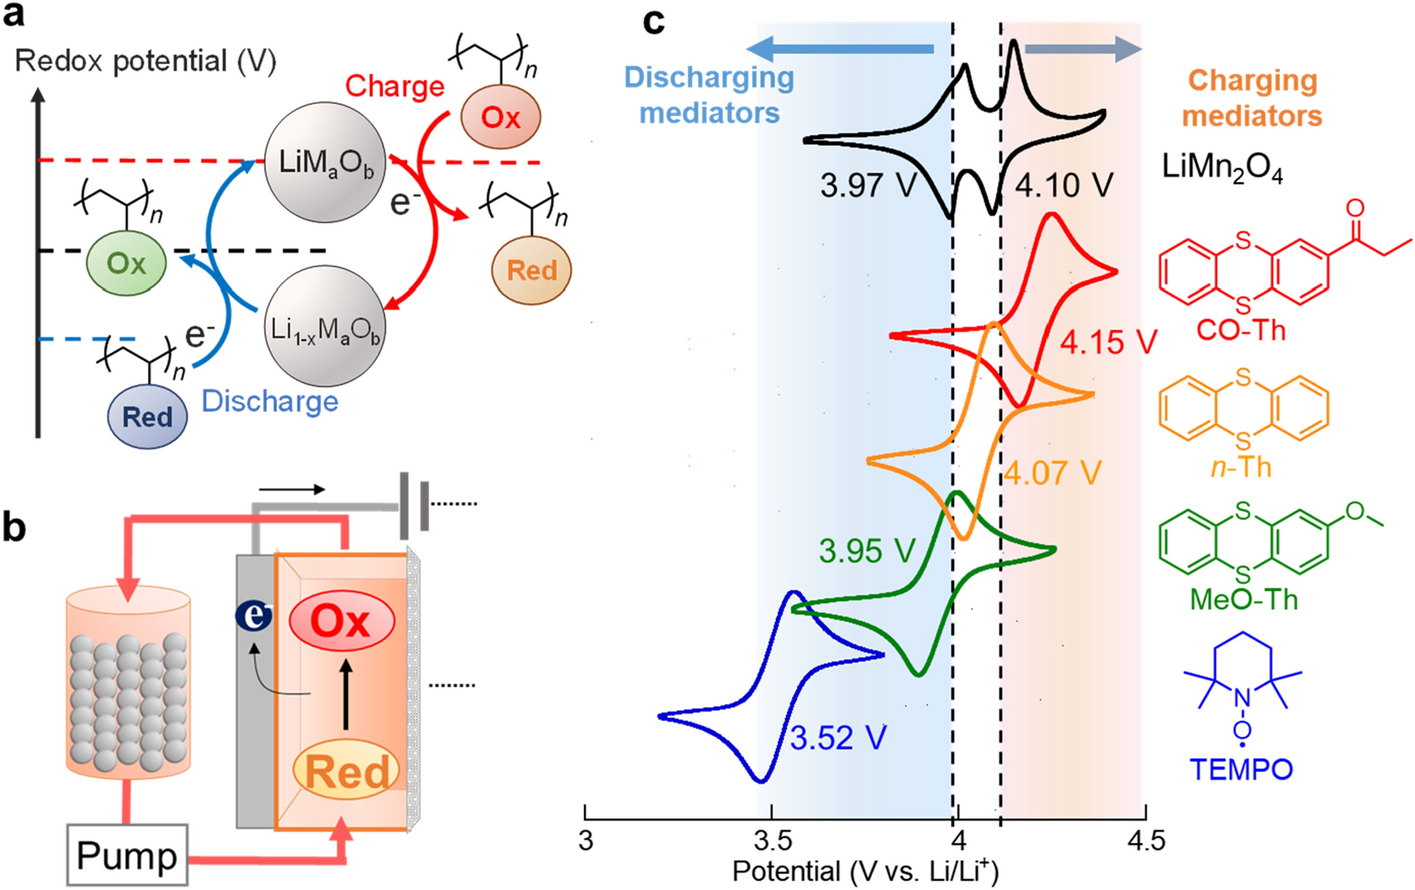 Thianthrene polymers as 4 V-class organic mediators for redox targeting  reaction with LiMn2O4 in flow batteries | Scientific Reports